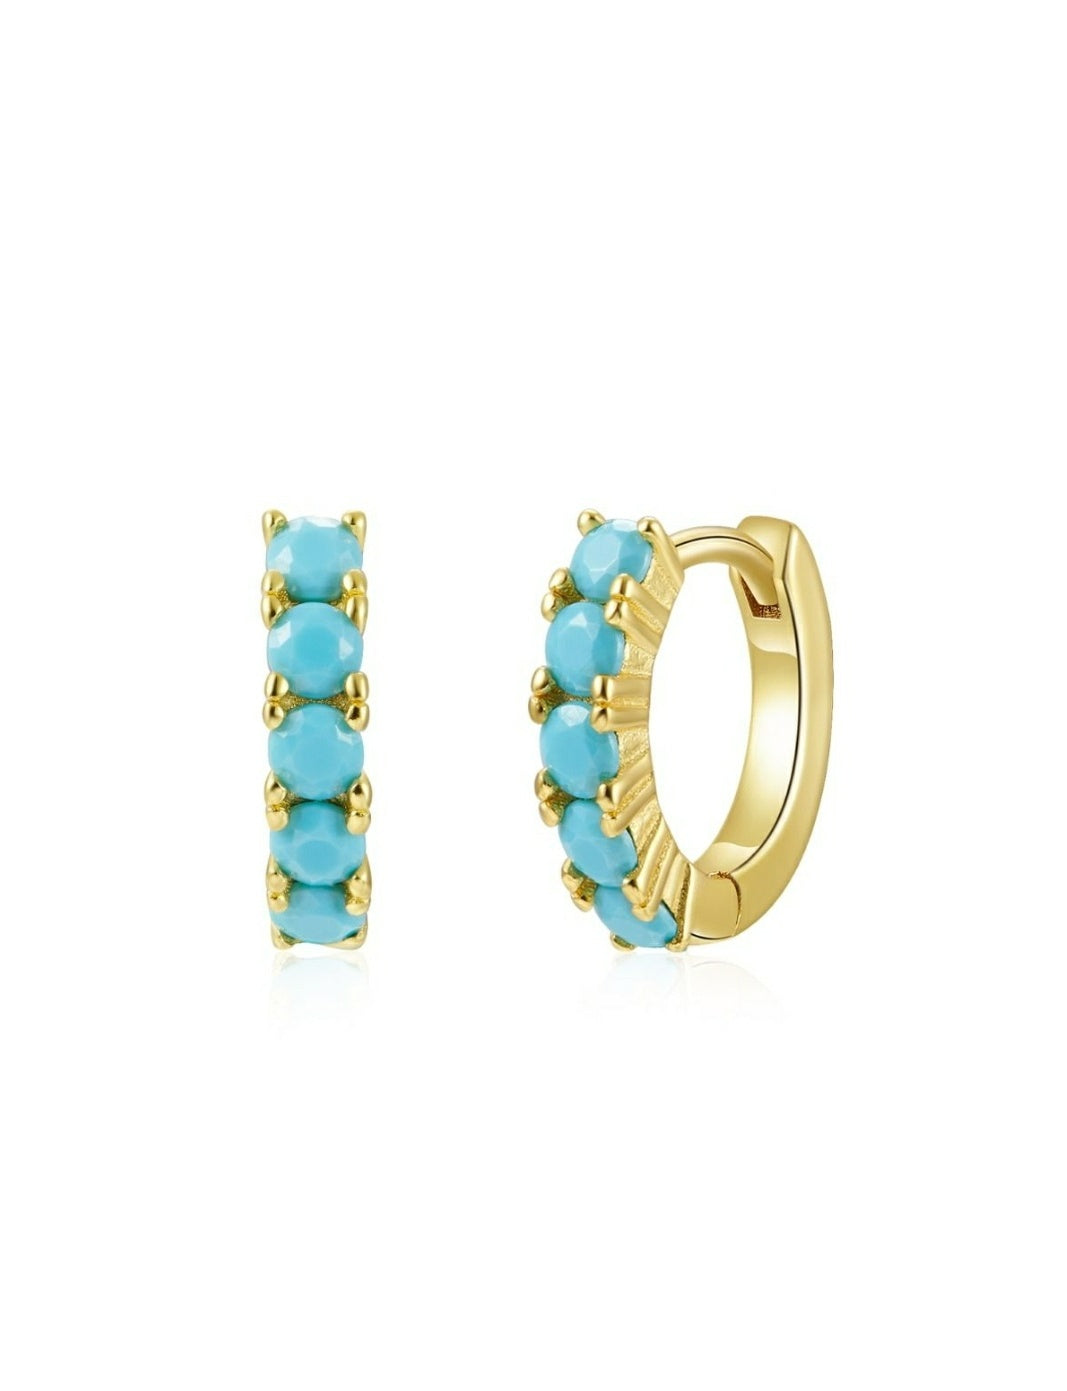 Turquoise Huggie Earrings from One Dame Lane